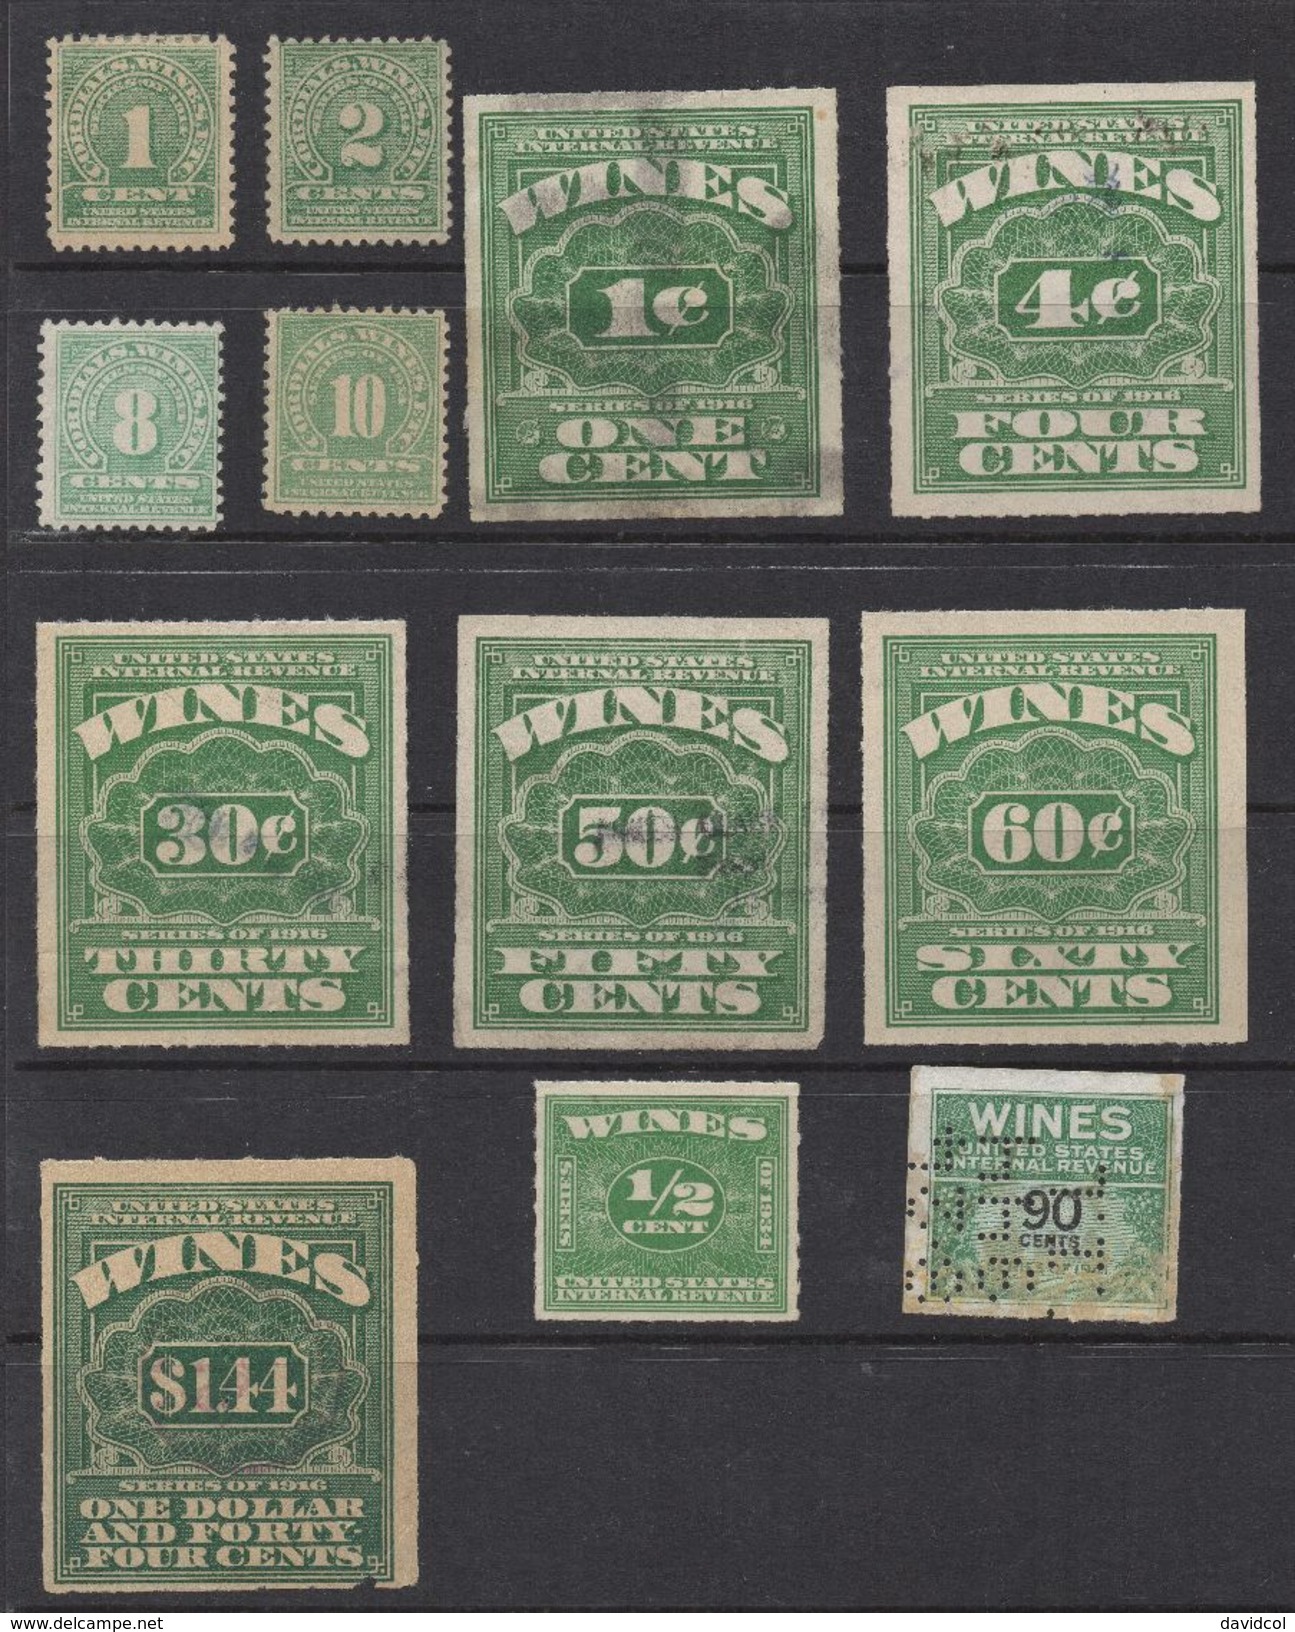 R274.-. USA- 1914-1941- WINE STAMPS LOT X 12 STAMPS- MINT/USED -1/2 CENT  TO US$ 1.44 - Steuermarken